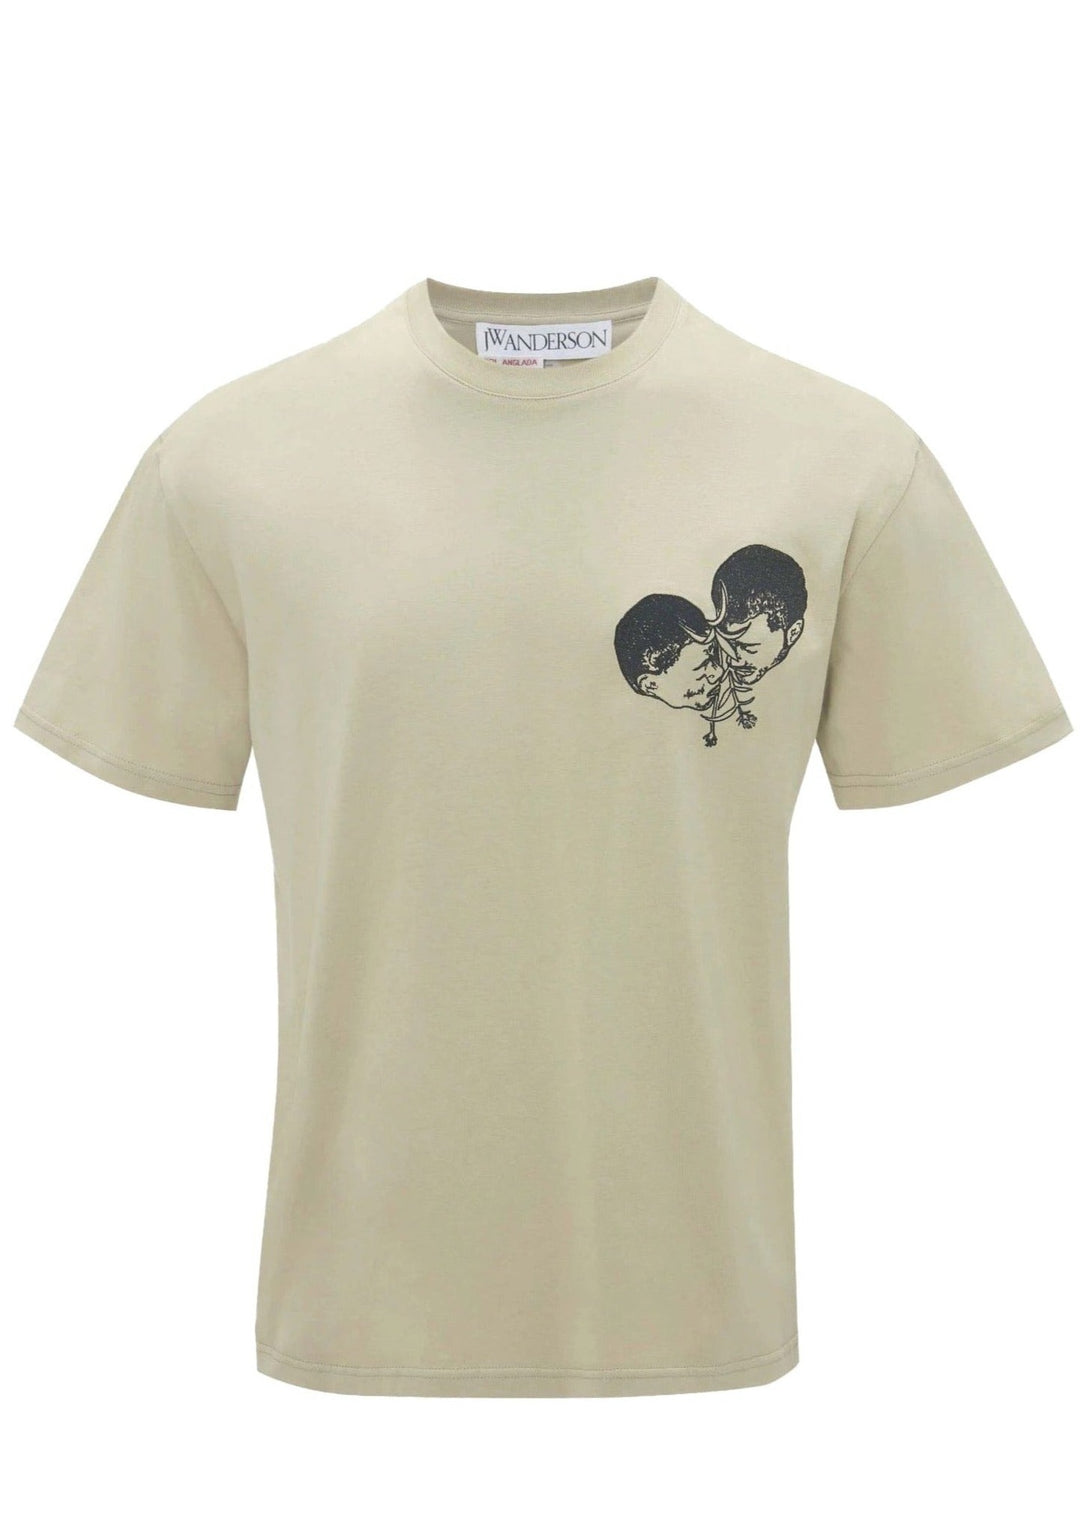 Pol couple embroidery t shirt